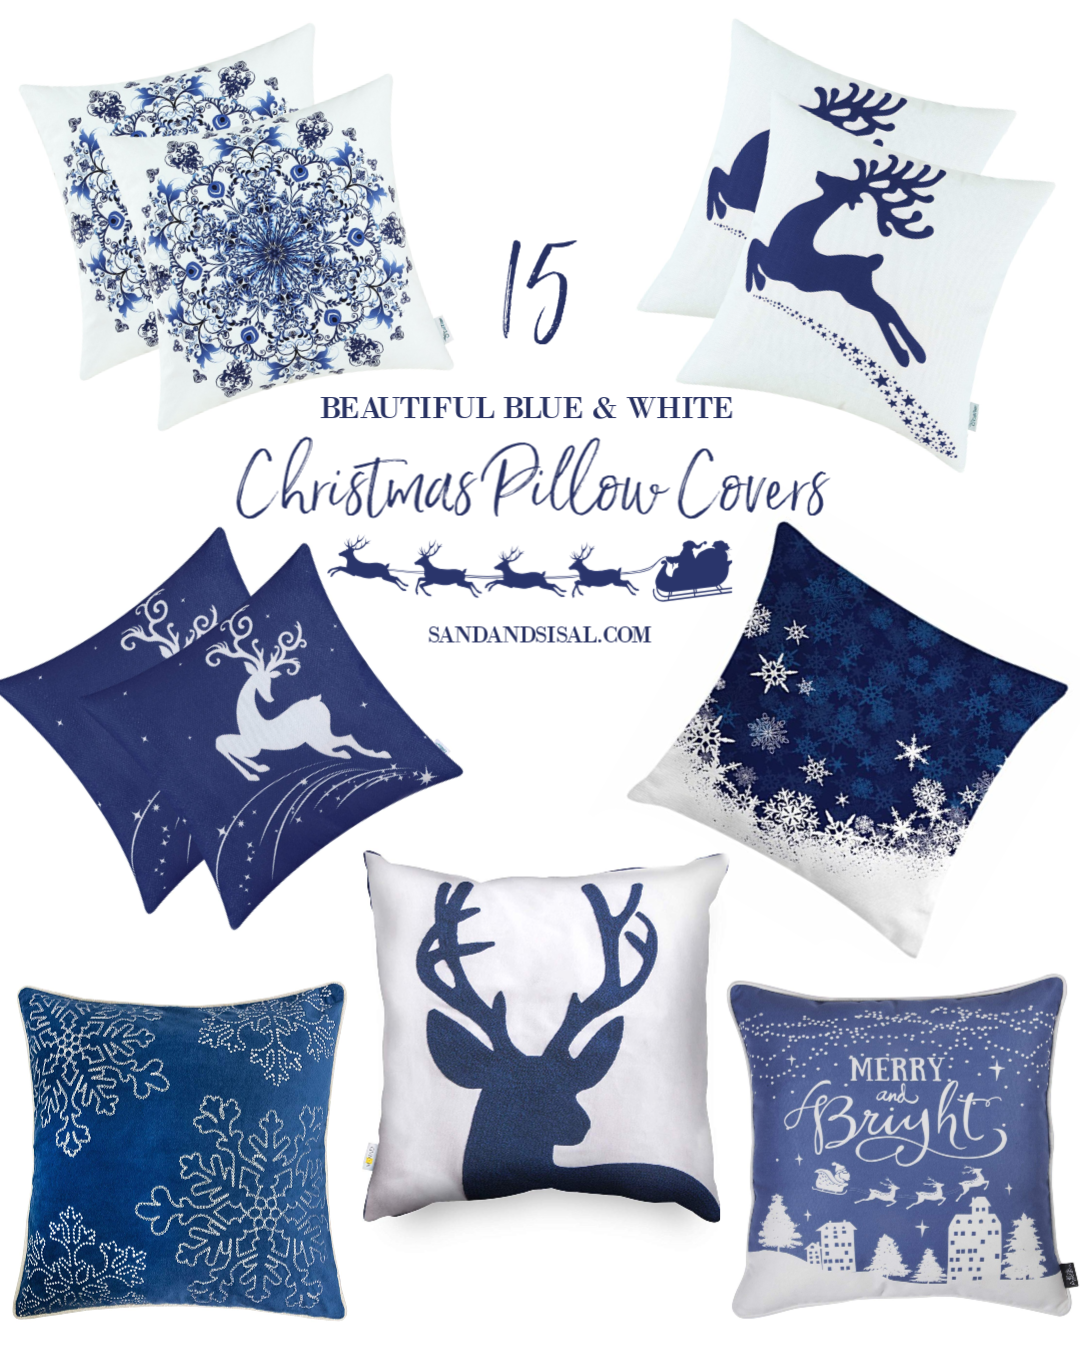 https://www.sandandsisal.com/wp-content/uploads/2018/11/15-Beautiful-Blue-and-White-Christmas-Pillow-Covers-.png